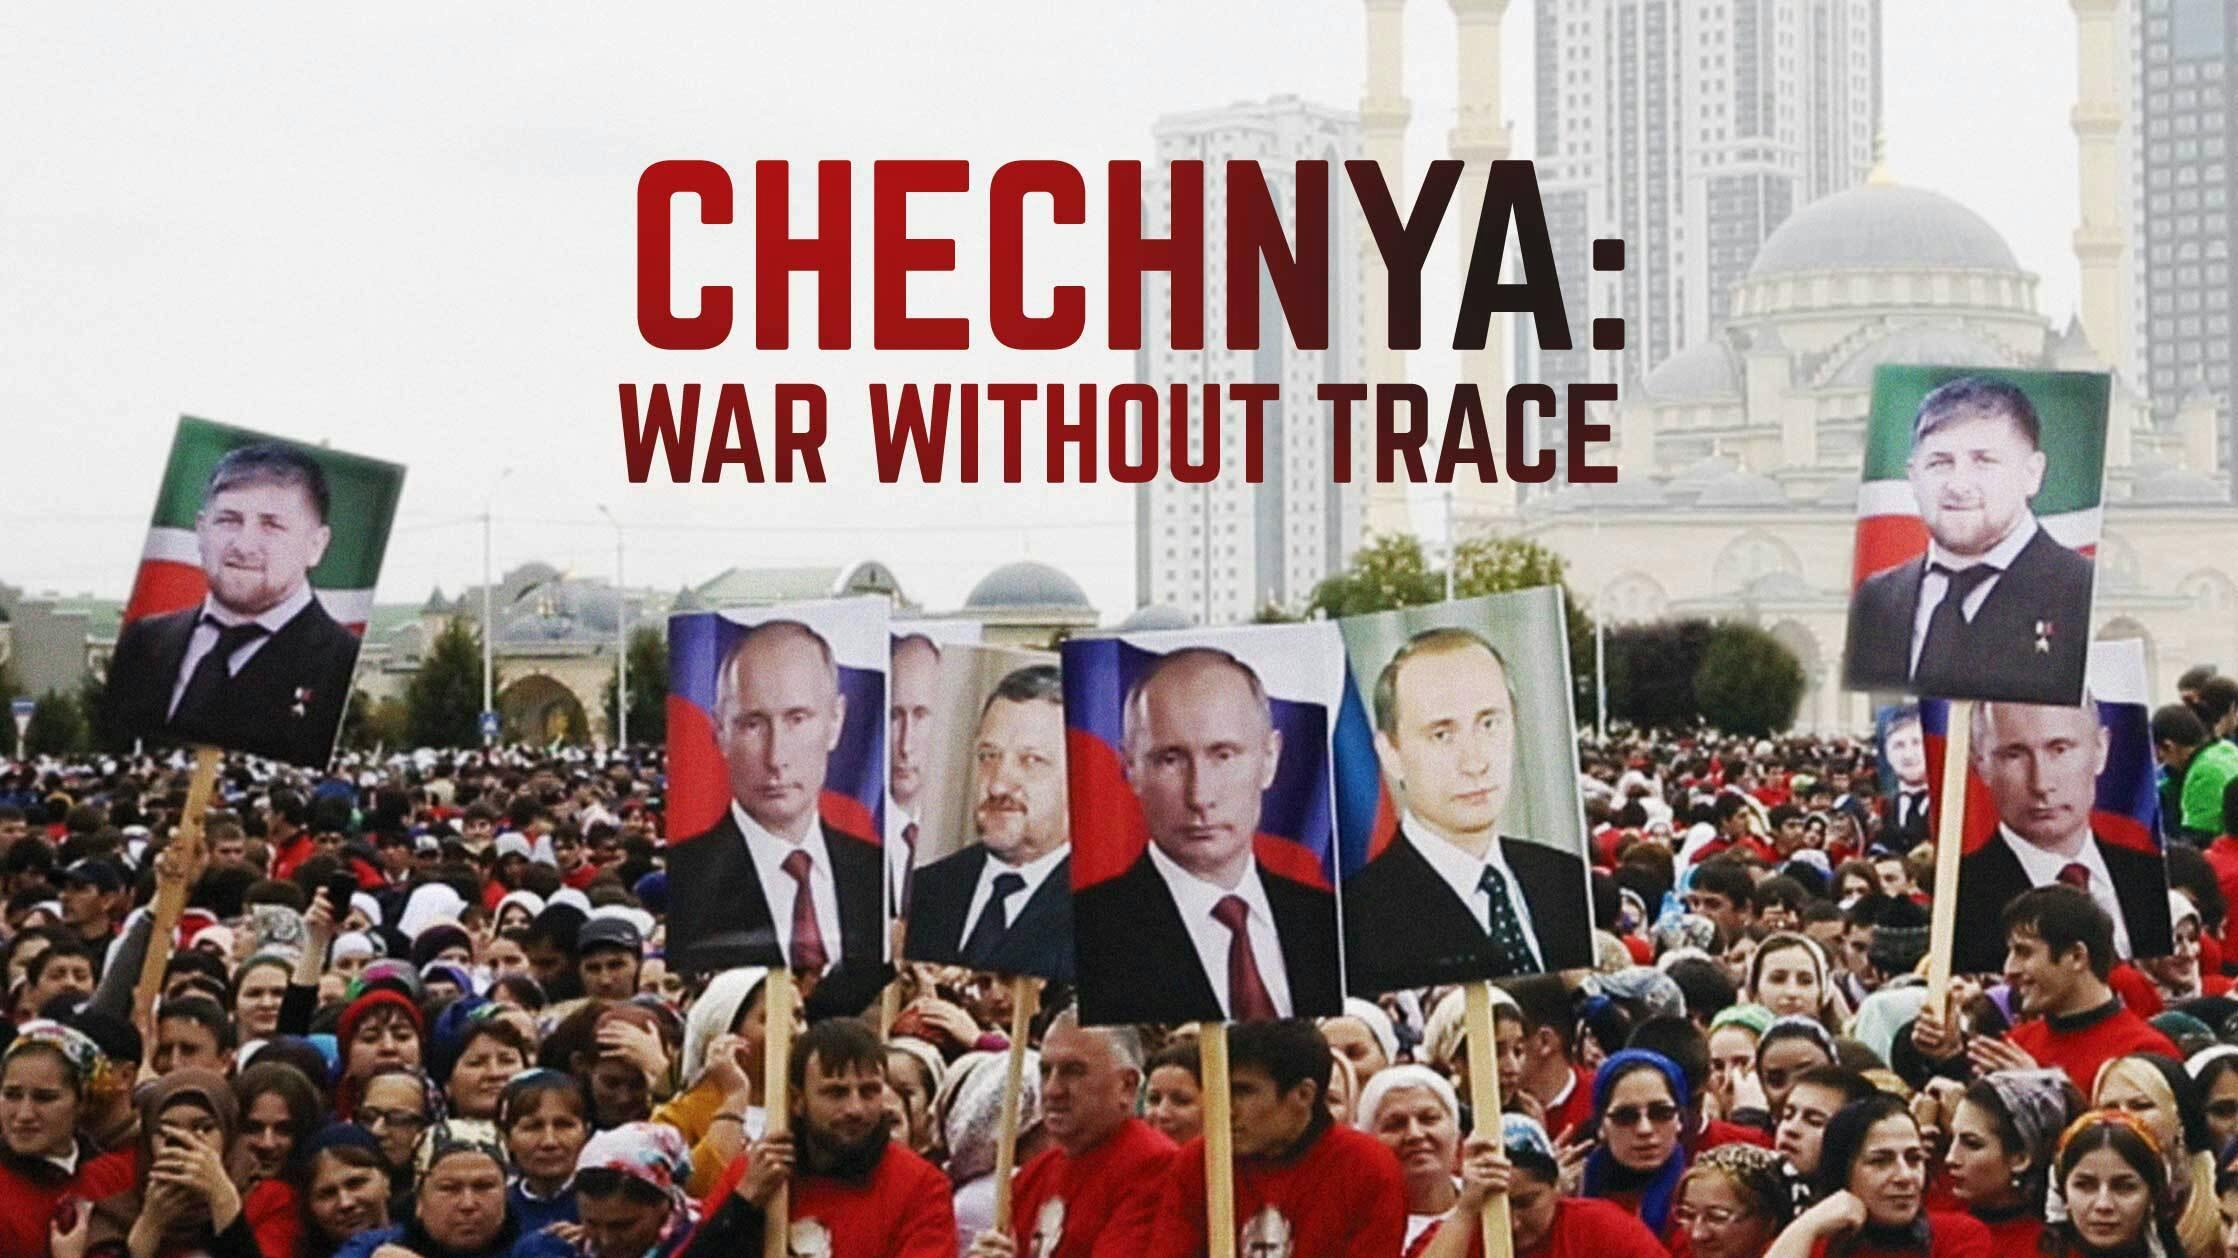 Chechnya: War Without Trace